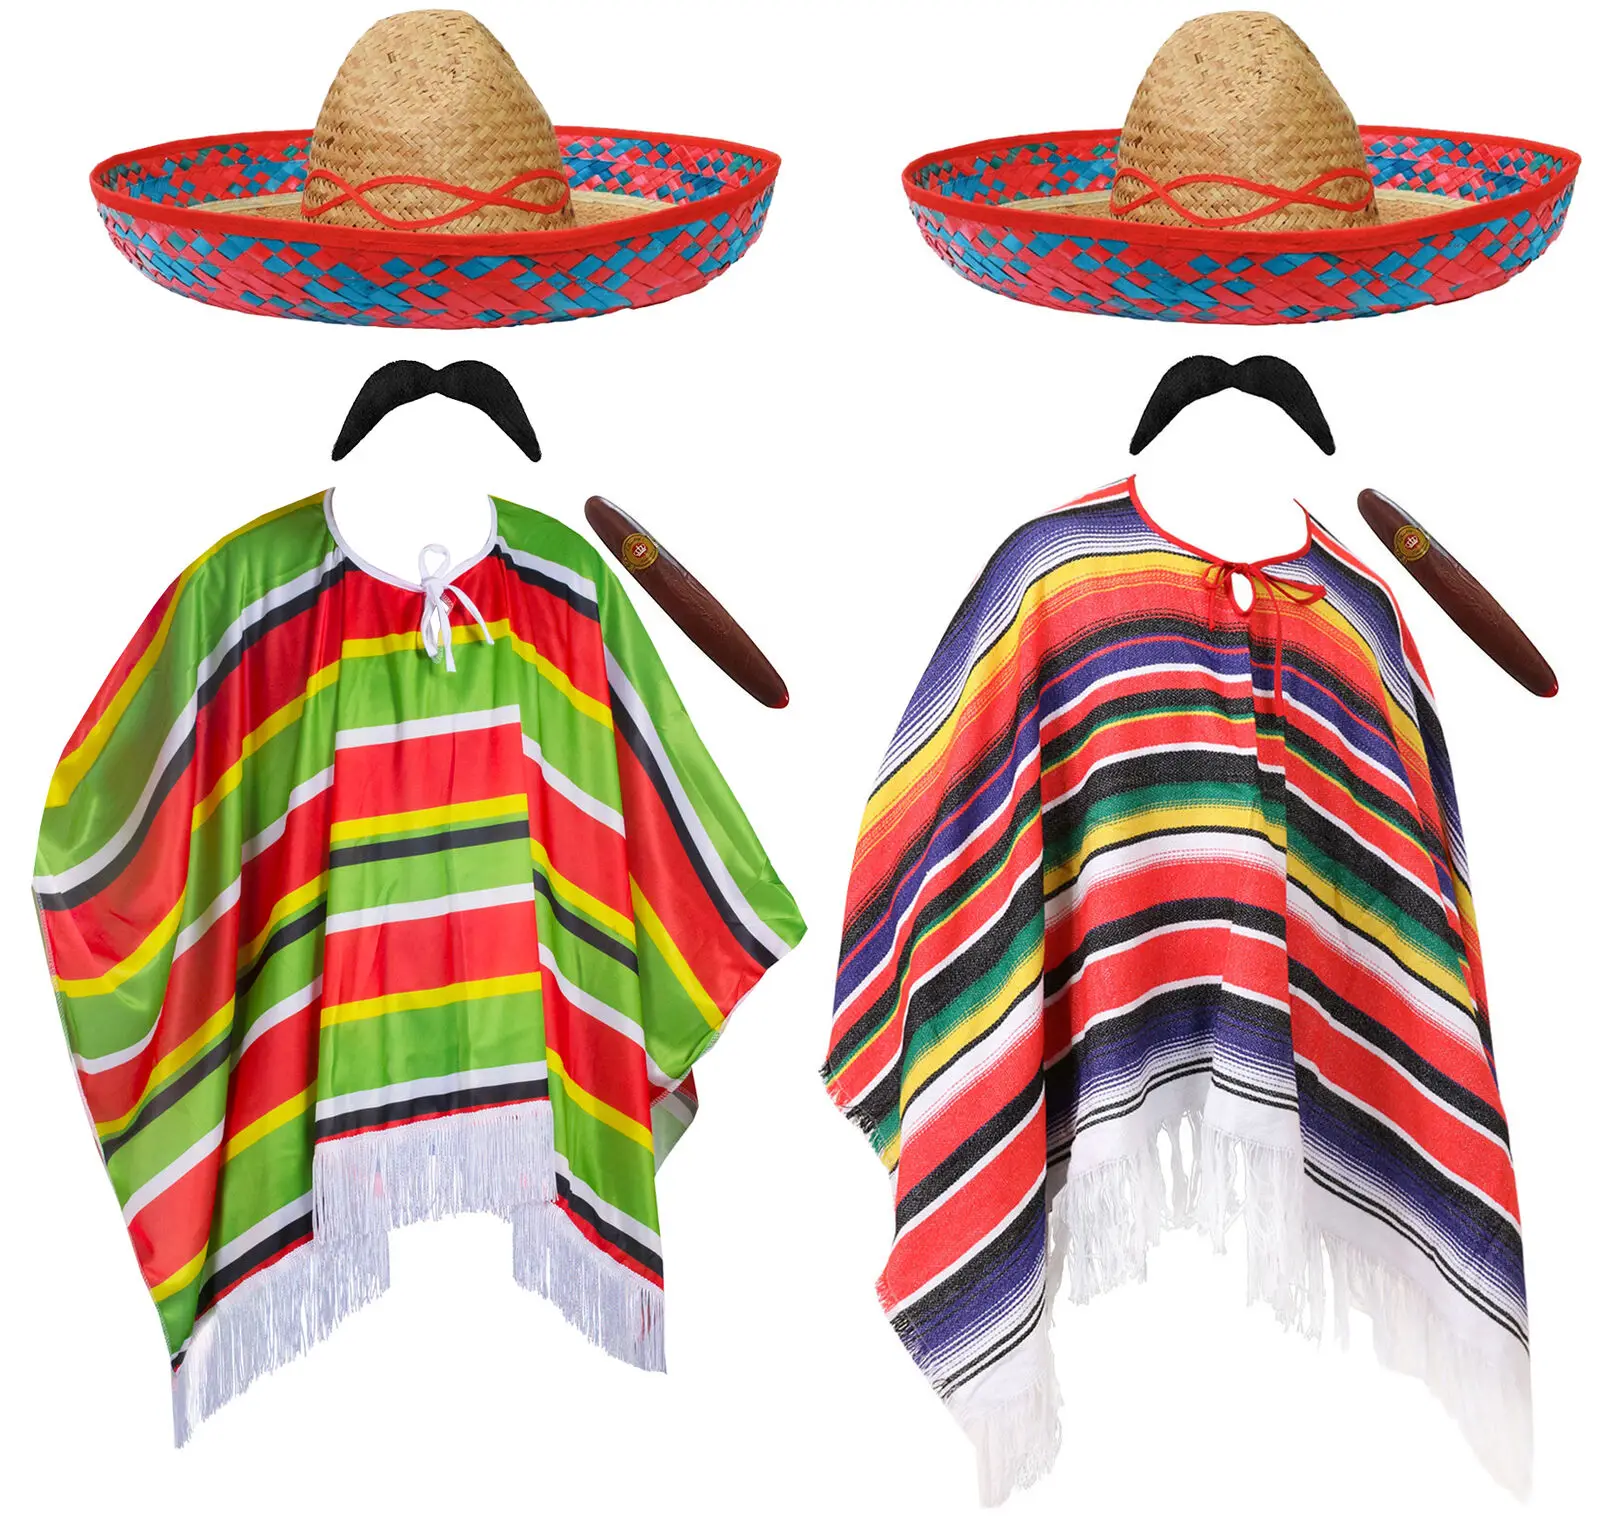 MEXICAN MAN COSTUME SOMBRERO PONCHO TASH CIGAR WESTERN ADULTS FANCY DRESS PARTY 